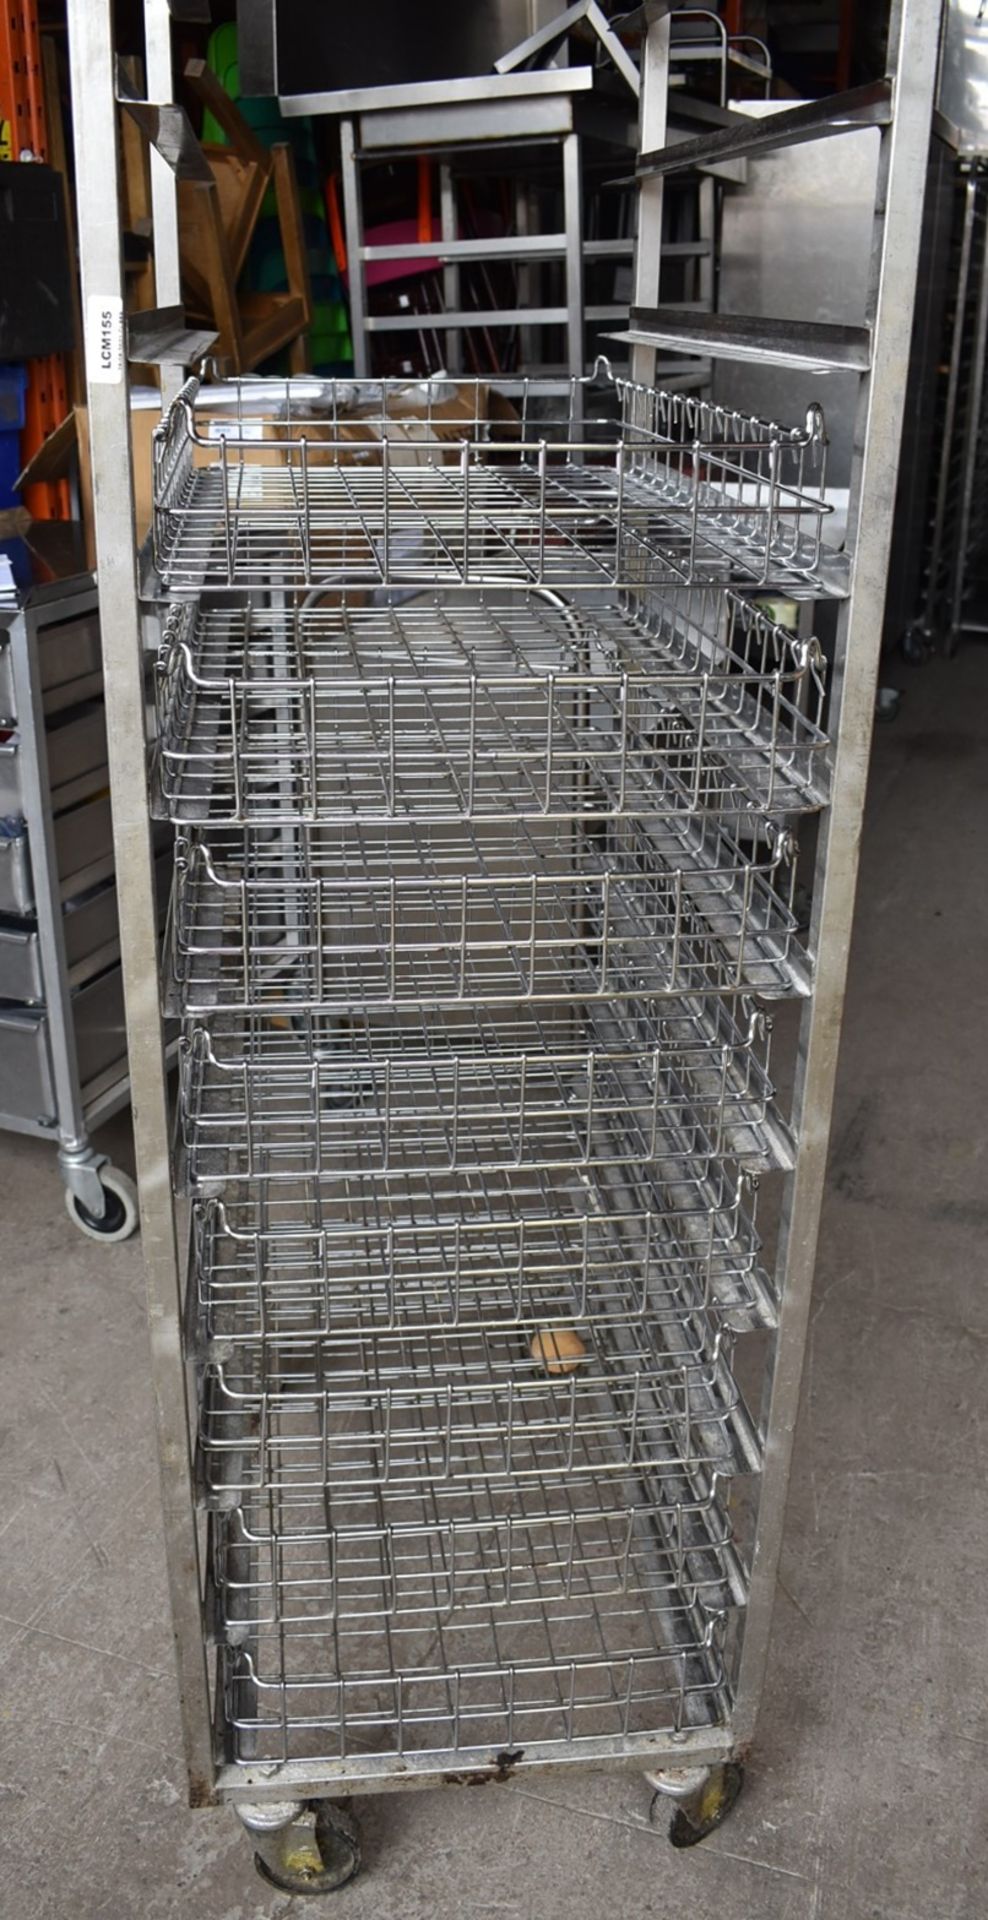 1 x Bakers 11 Tier Mobile Tray Rack With 8 Removable Wire Baskets - Stainless Steel With Castors - - Image 5 of 6